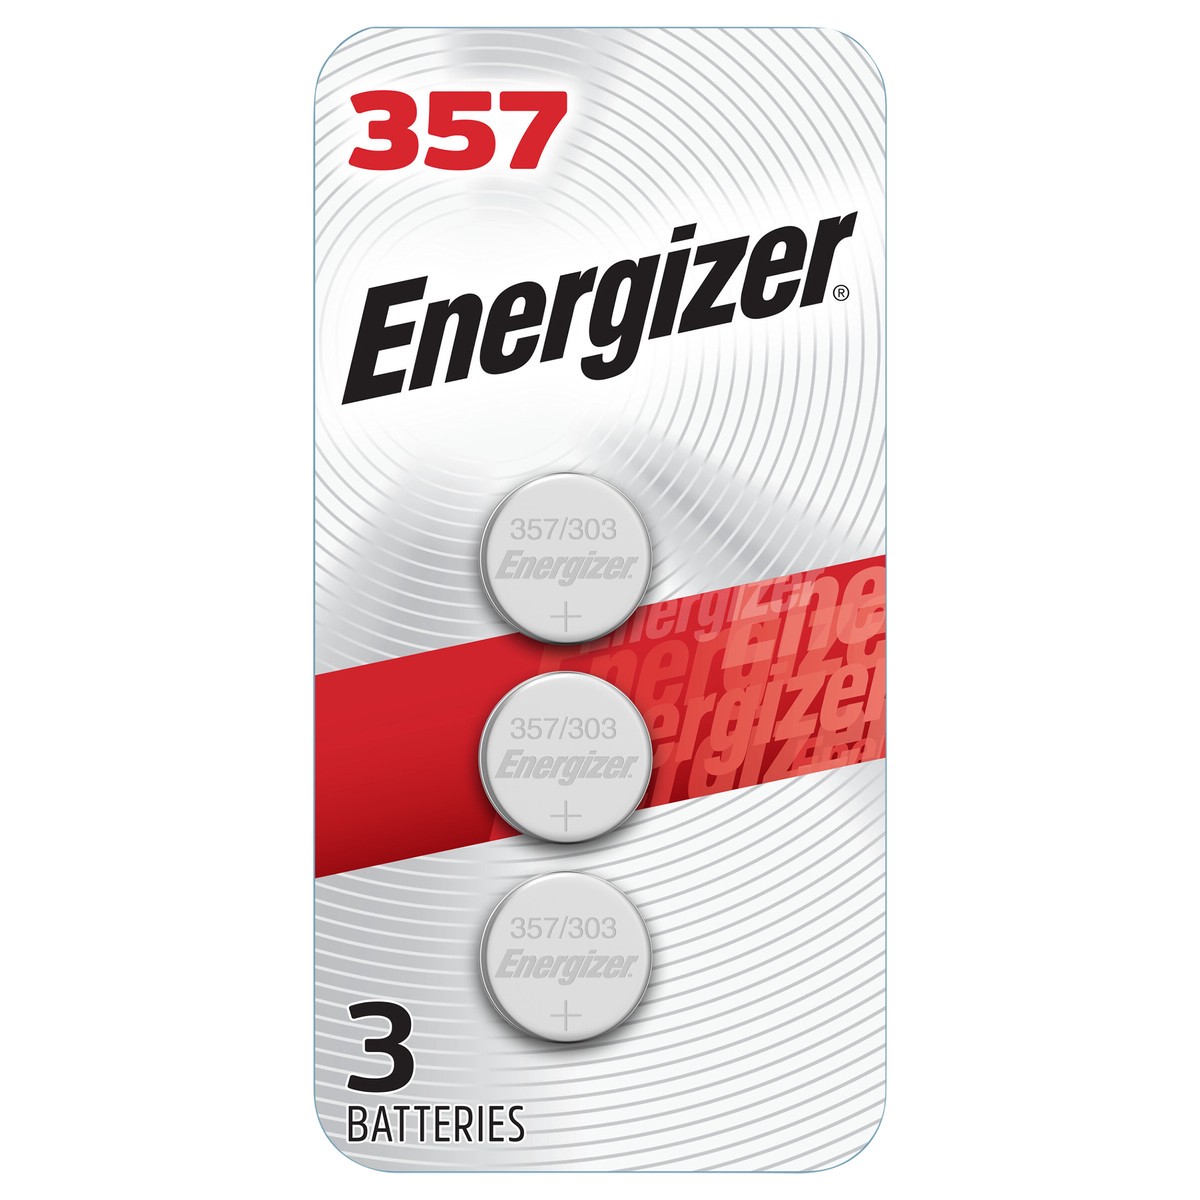 slide 2 of 5, Energizer 357 Silver Oxide Coin Batteries, 3 ct